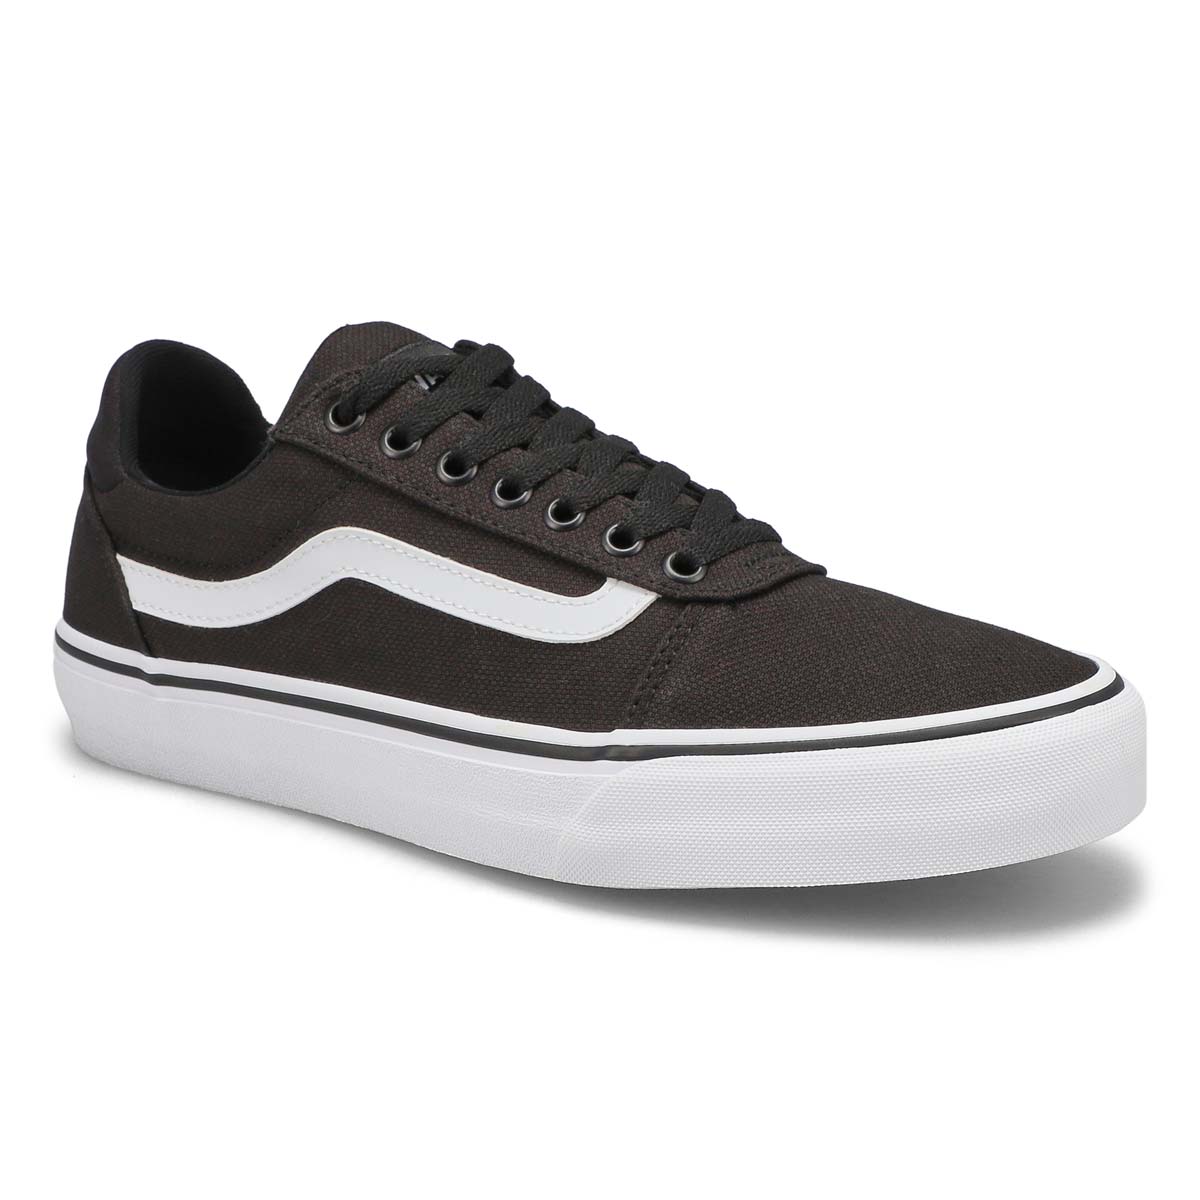 cheapest place to buy vans